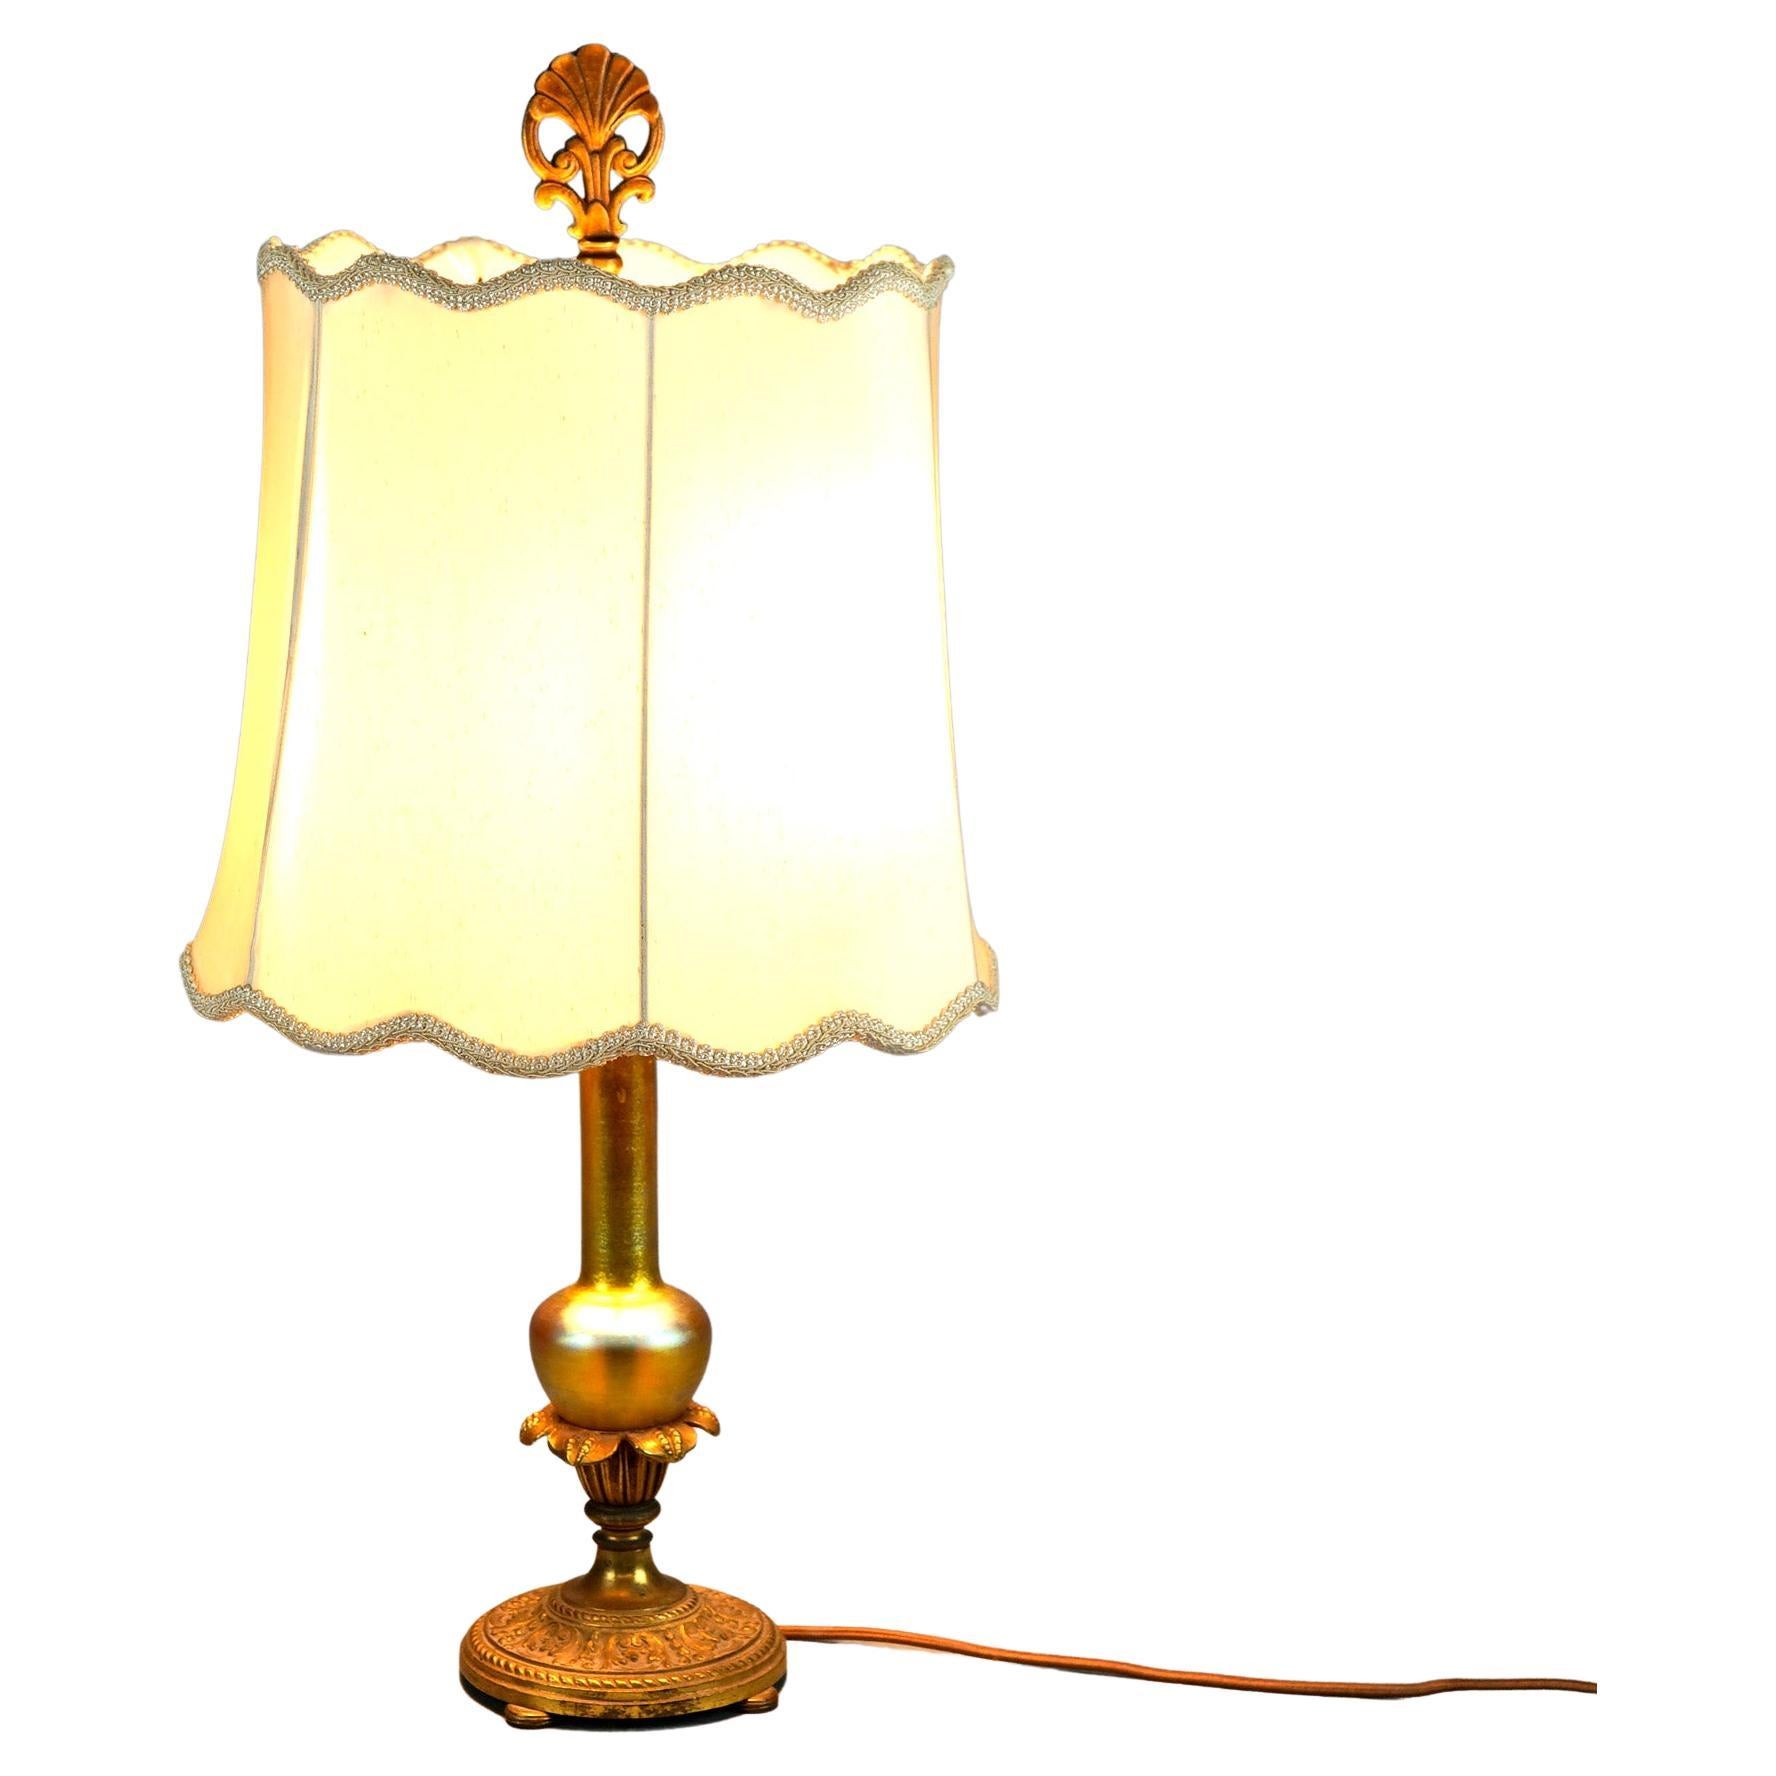 An antique table lamp offers an art glass vase column by Steuben mounted in double socket foliate cast base, c1920

Measures- 25''H x 11.25''W x 11.25''D.